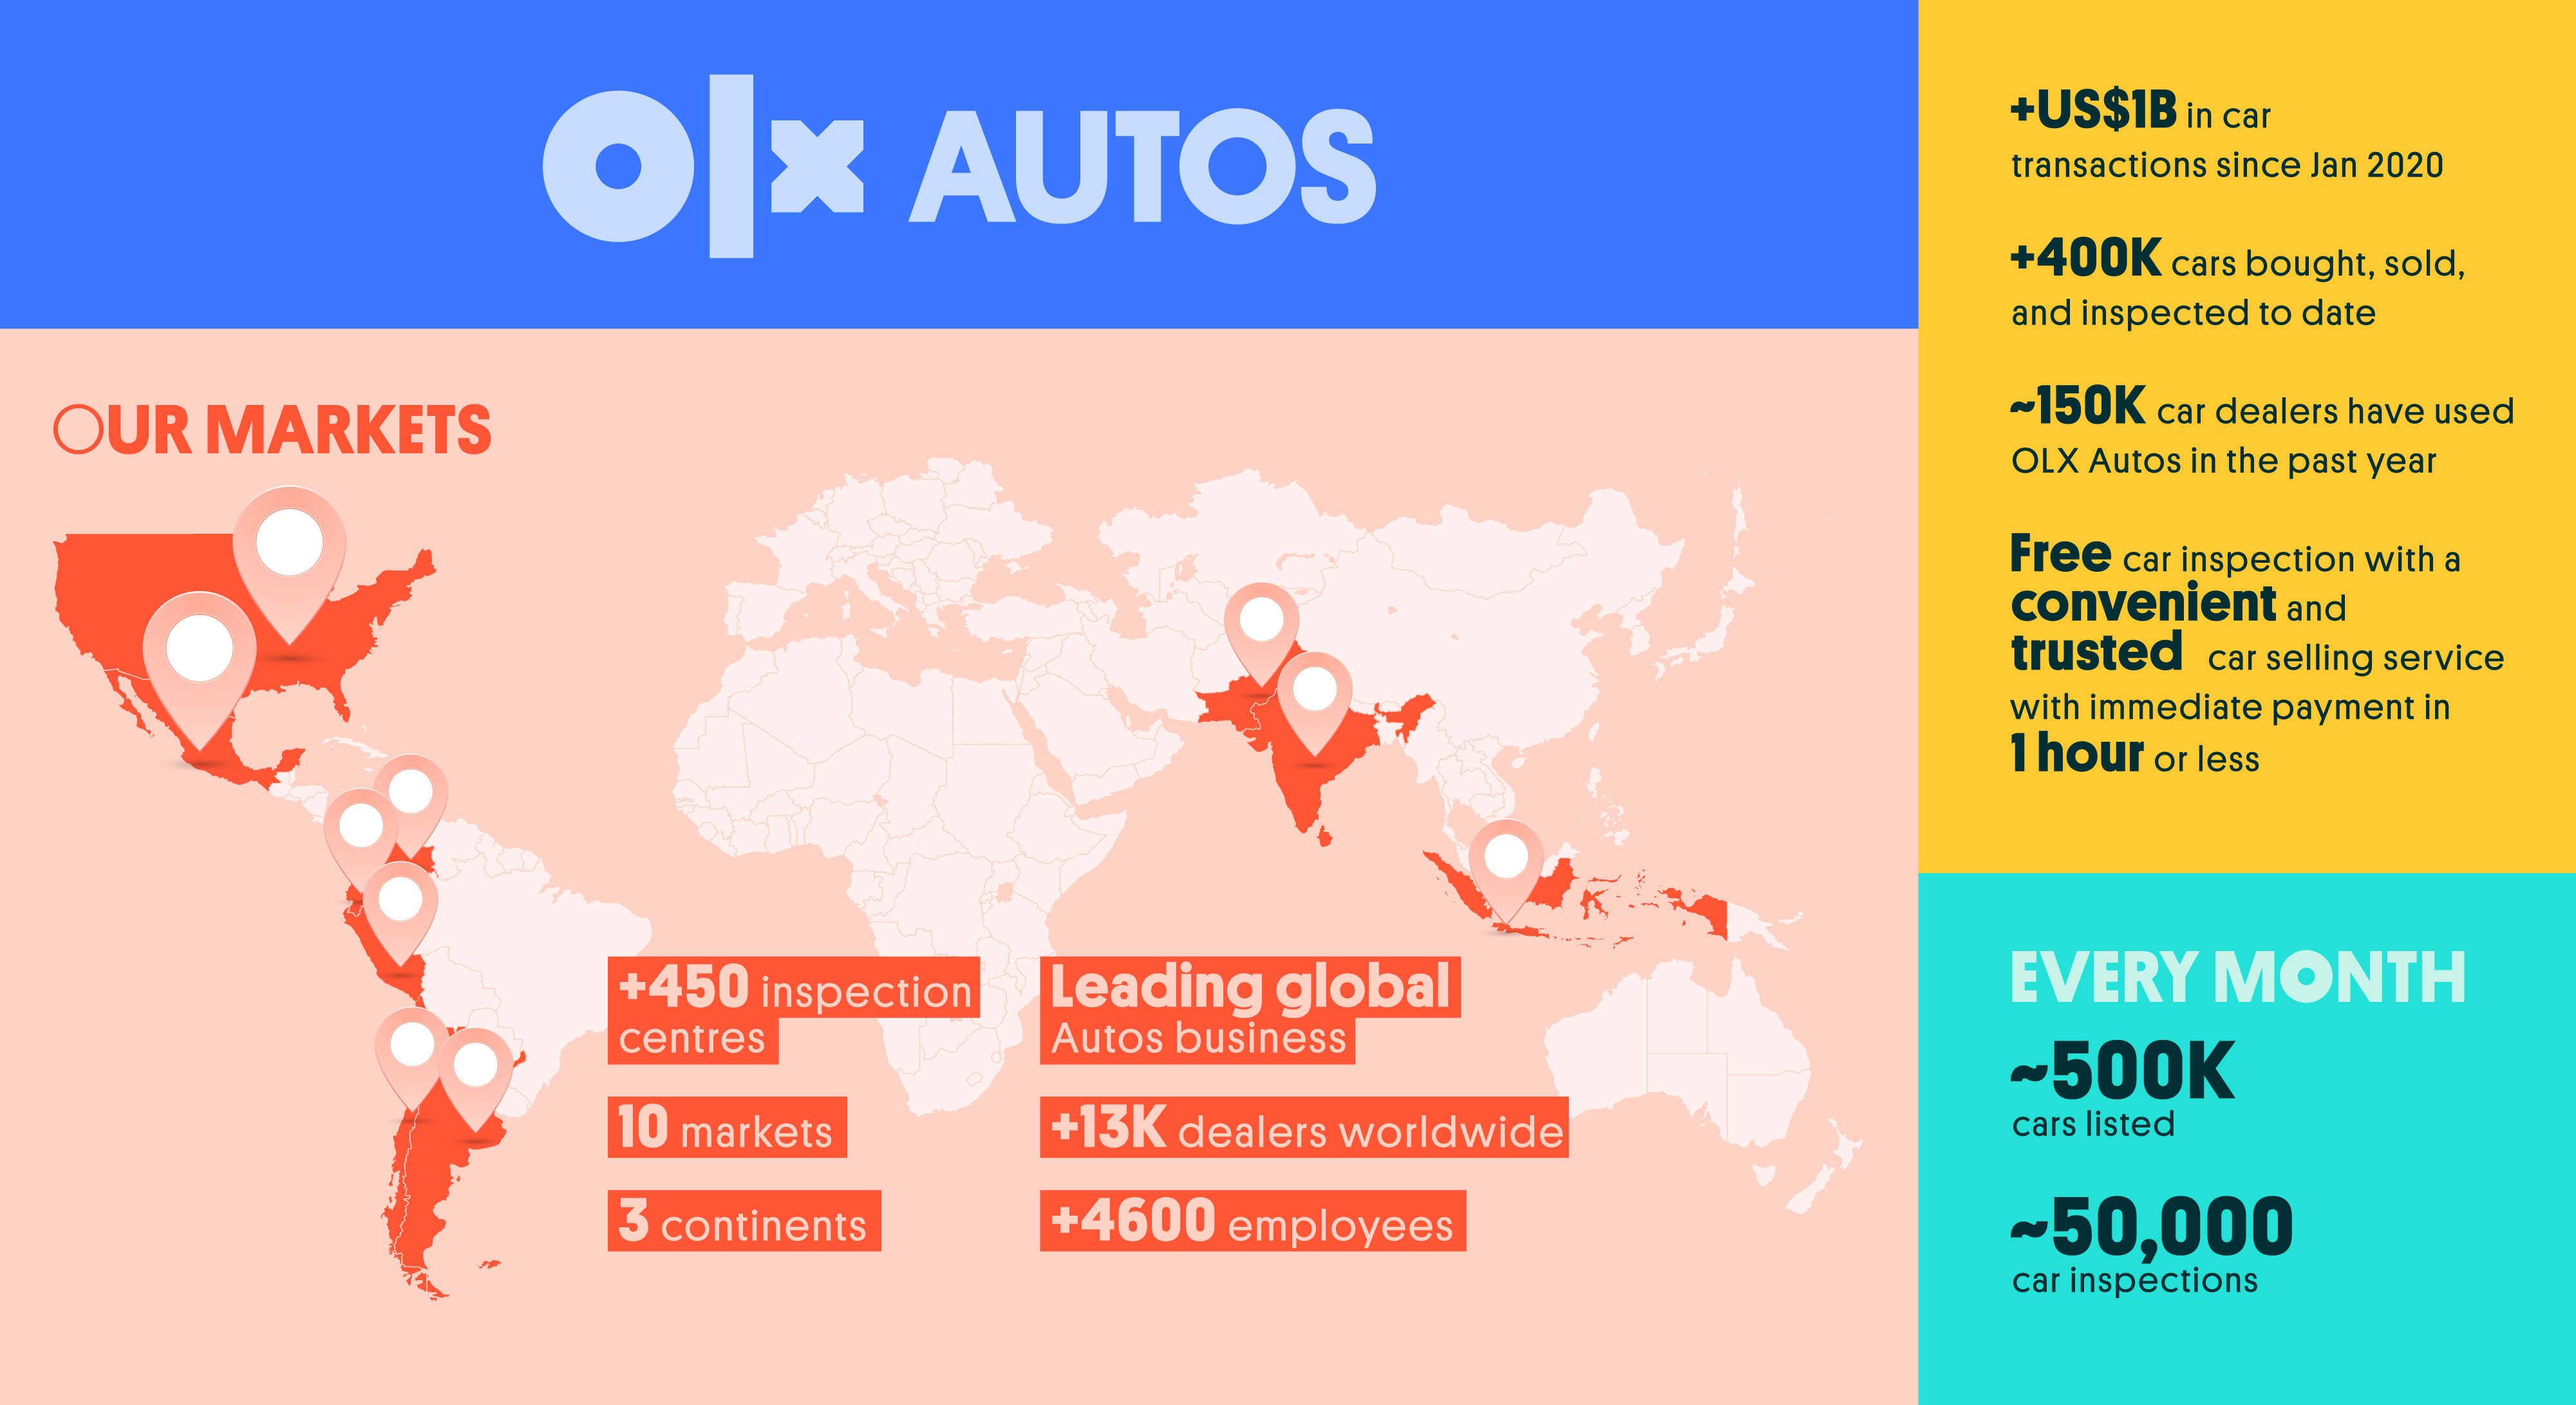 OLX Autos Reaches US$1b in Second-hand Car Transactions | Business Wire